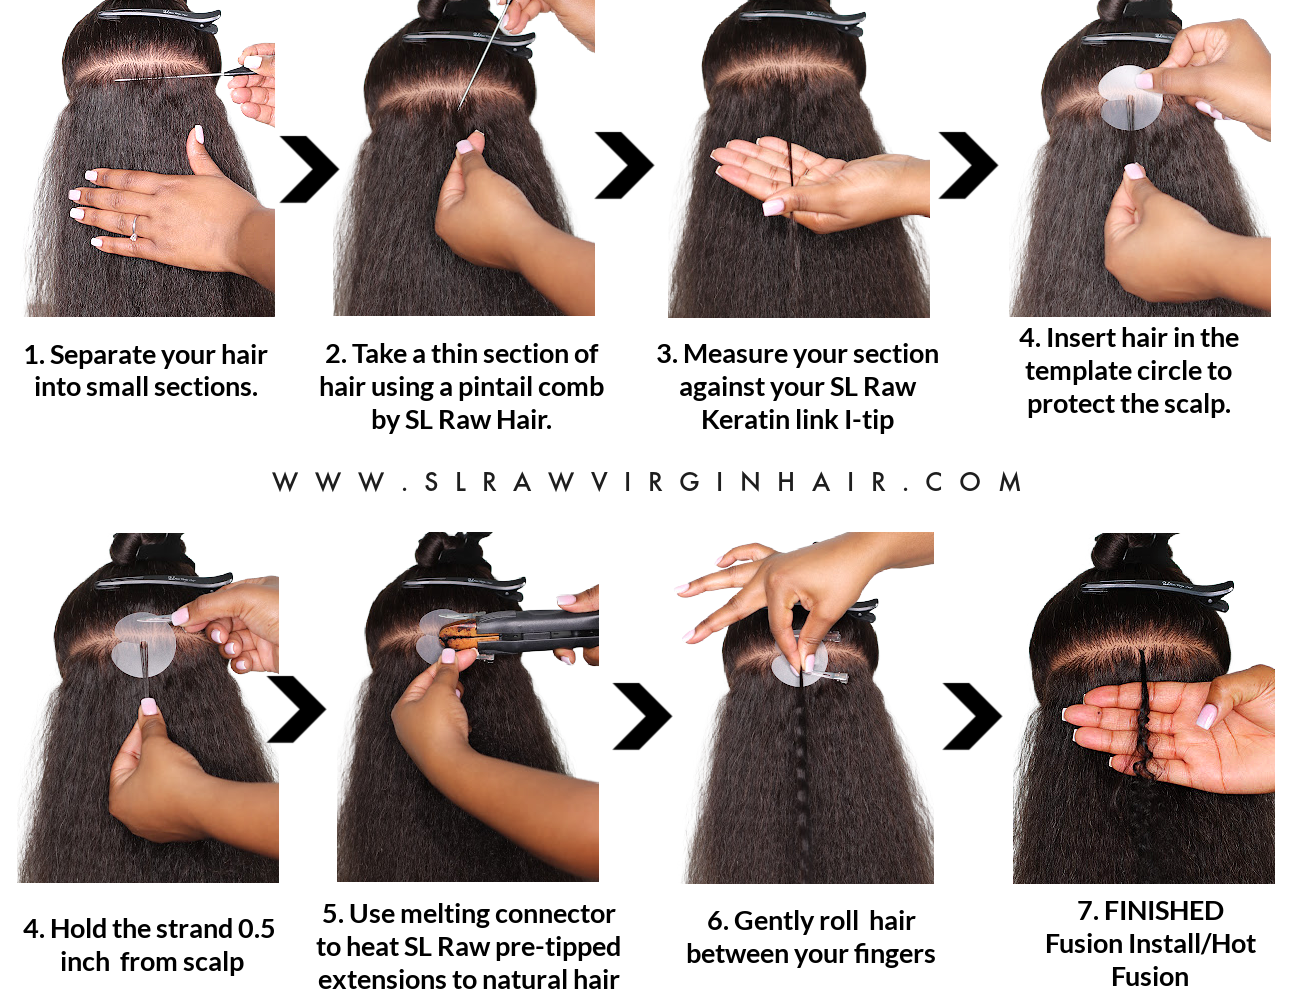 How to Fusion Install Using SL Raw Virgin Hair® Keratin I-Tip Links In this simple-to-follow illustration, learn how to correctly install Keratin stick tips (k-tips) using Award-winning hair extensions by SL Raw Virgin Hair® for beginners. Follow step-by-step instructions #fusions #slrawvirginhair #naturalhair #howto #wavyhair